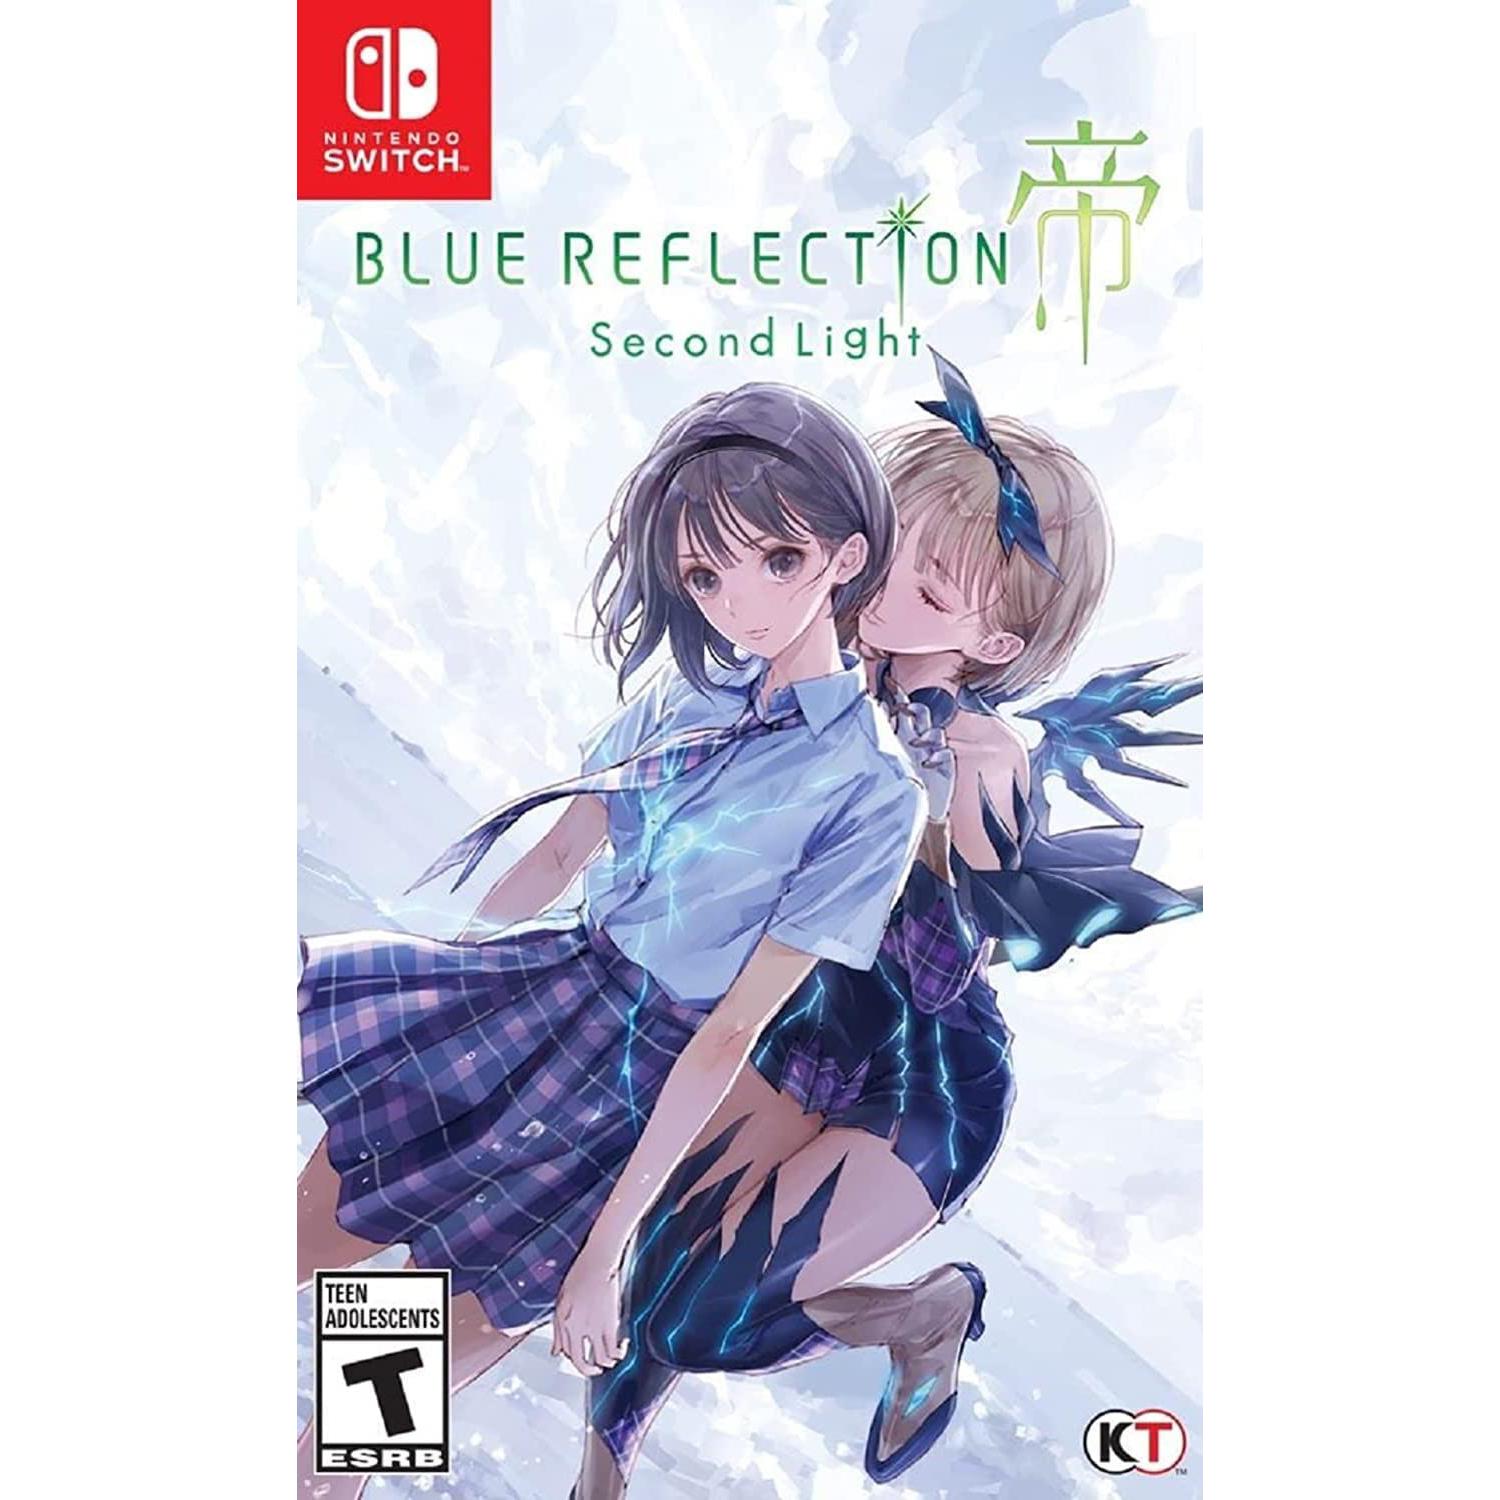 Blue Reflection Second Light Nintendo Switch for $39.99 Shipped